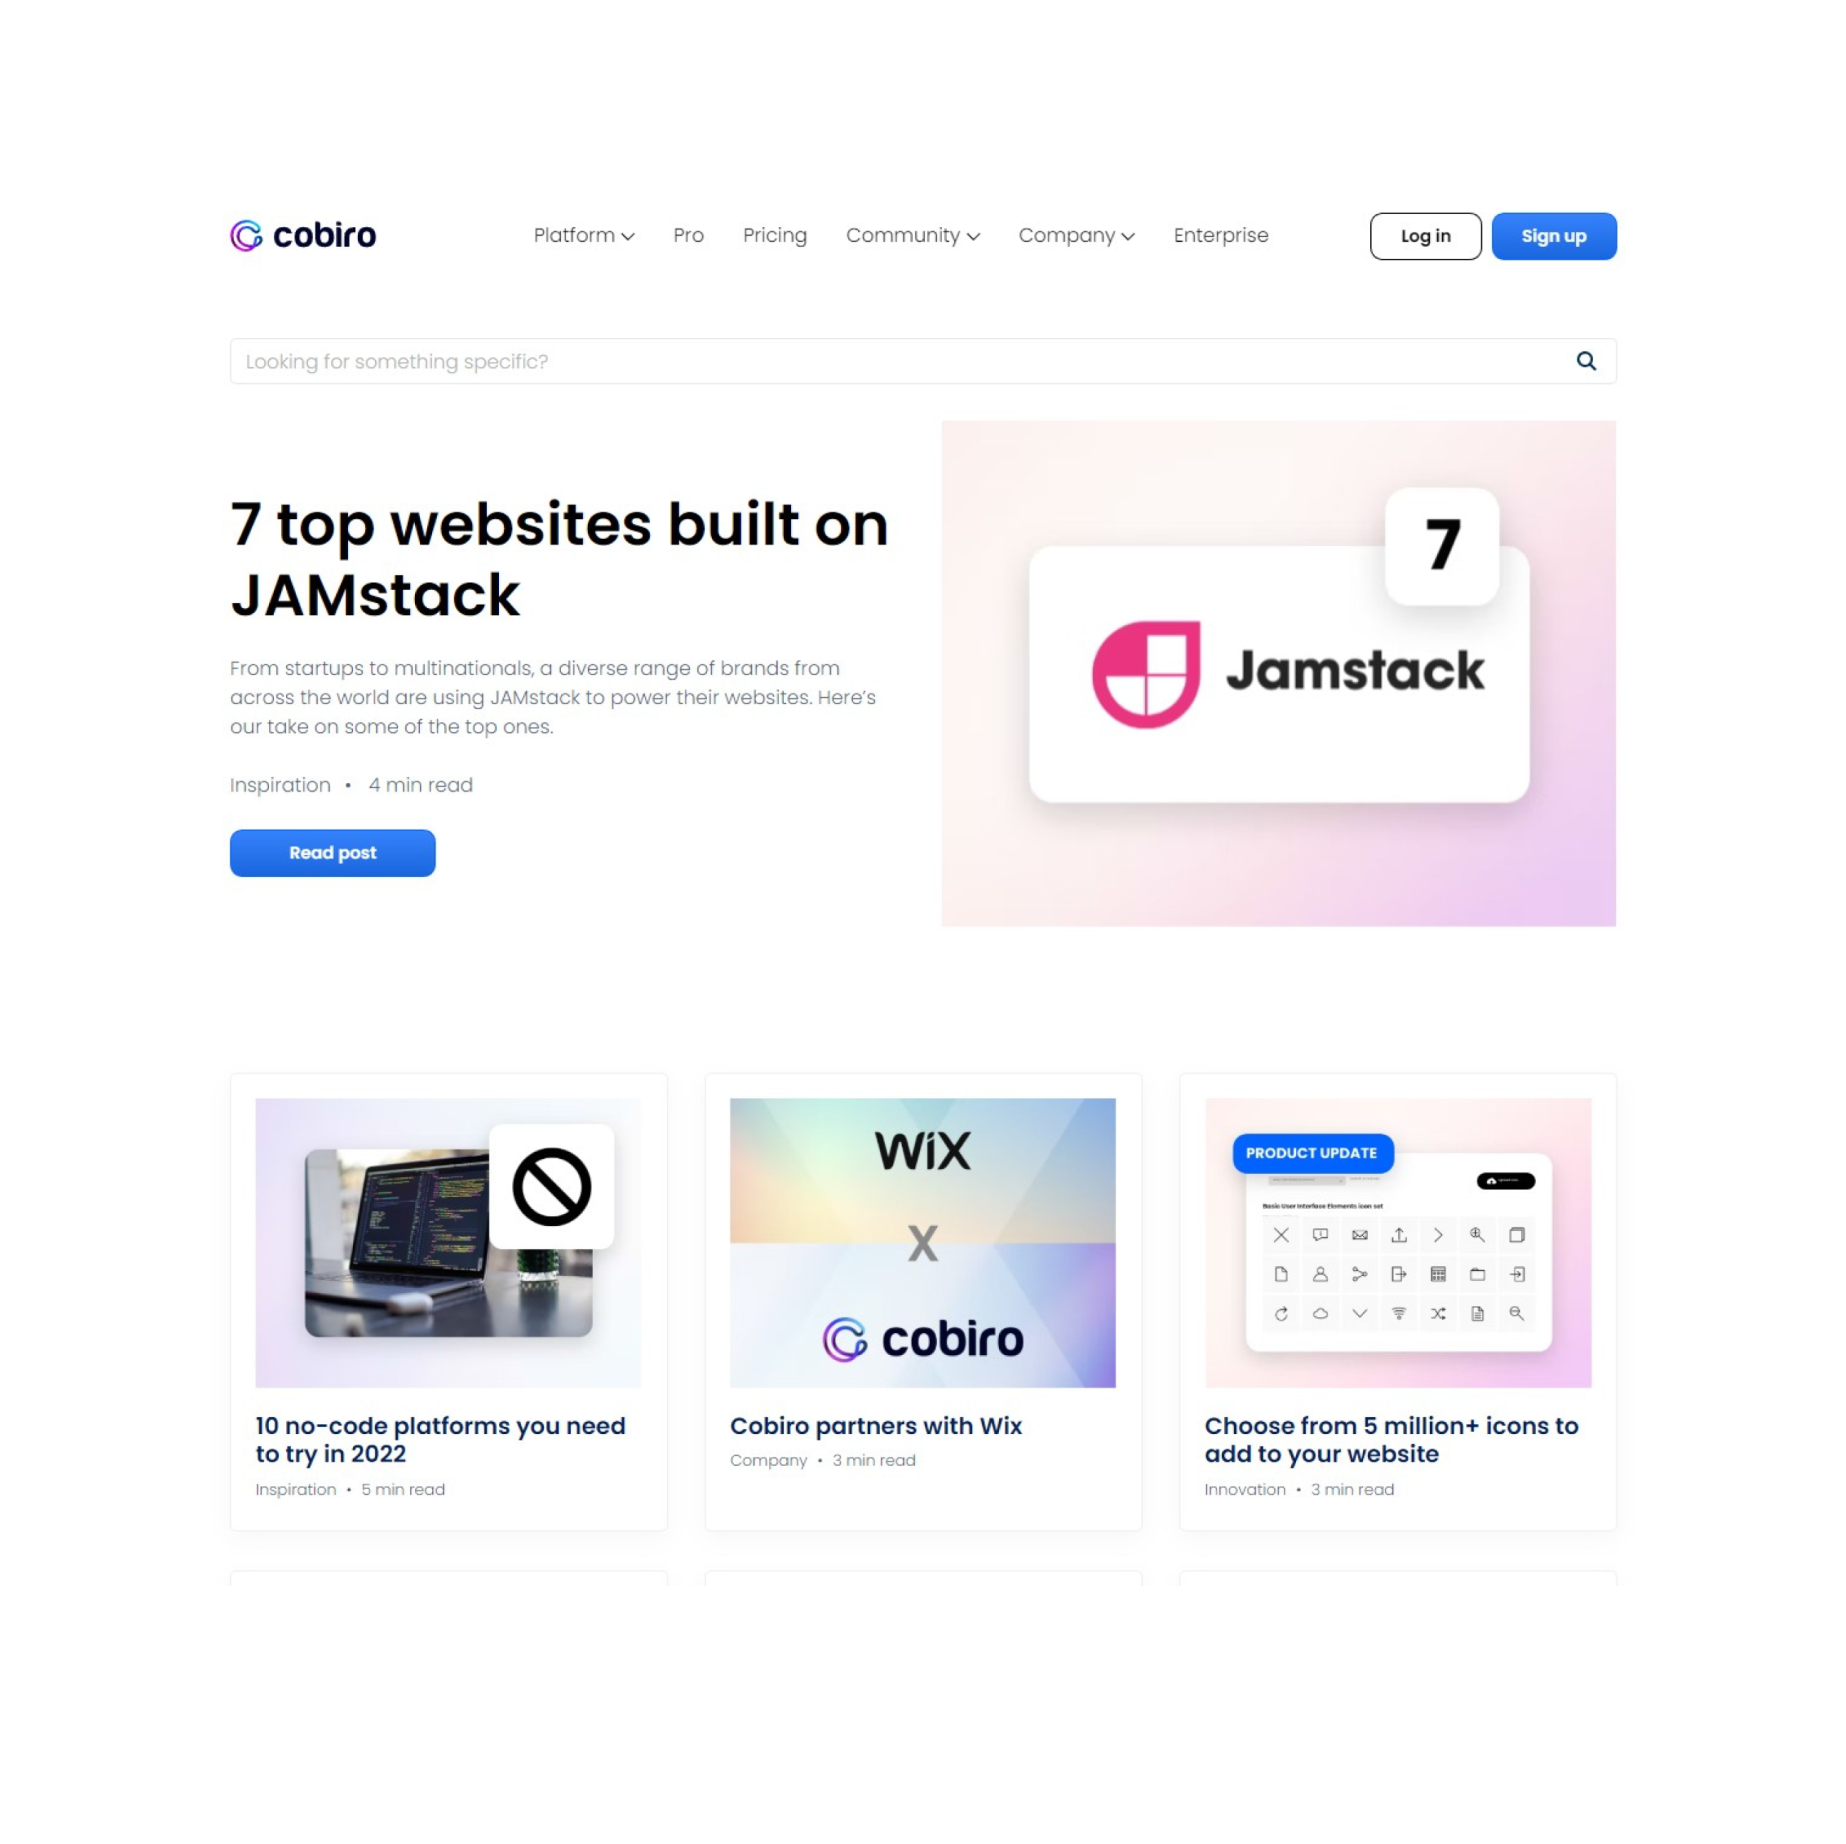 Content from Cobiro's website highlighting a blog post titled '7 top websites built on JAMstack' and other featured articles on tech platforms and partnerships.